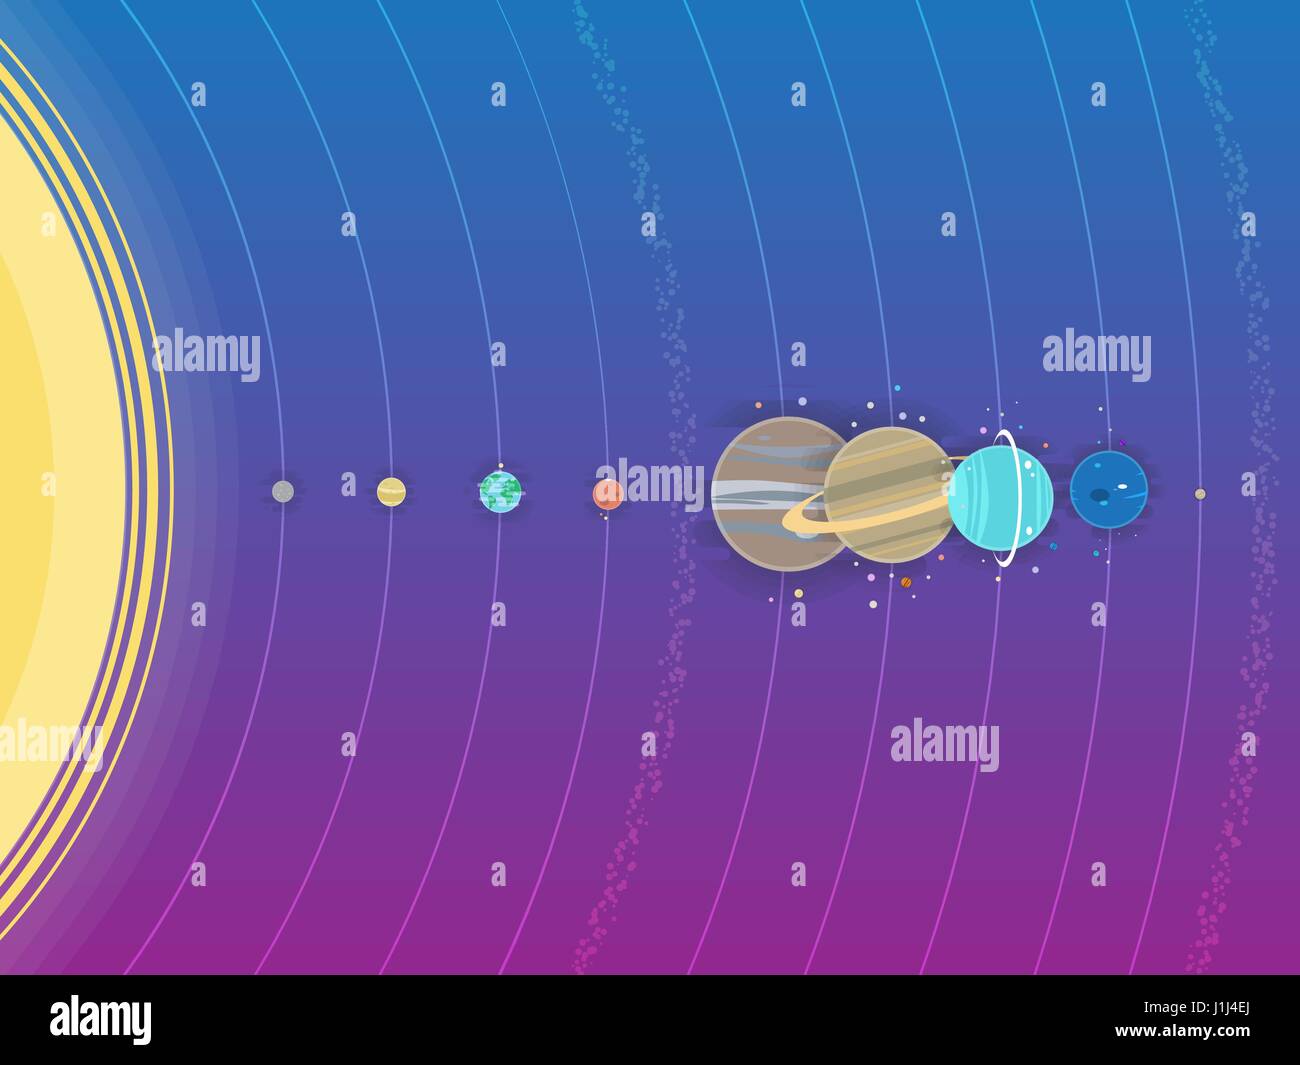 Solar system - planets, comet, satellite of the planets flat illustration with comparative dimensions Stock Vector